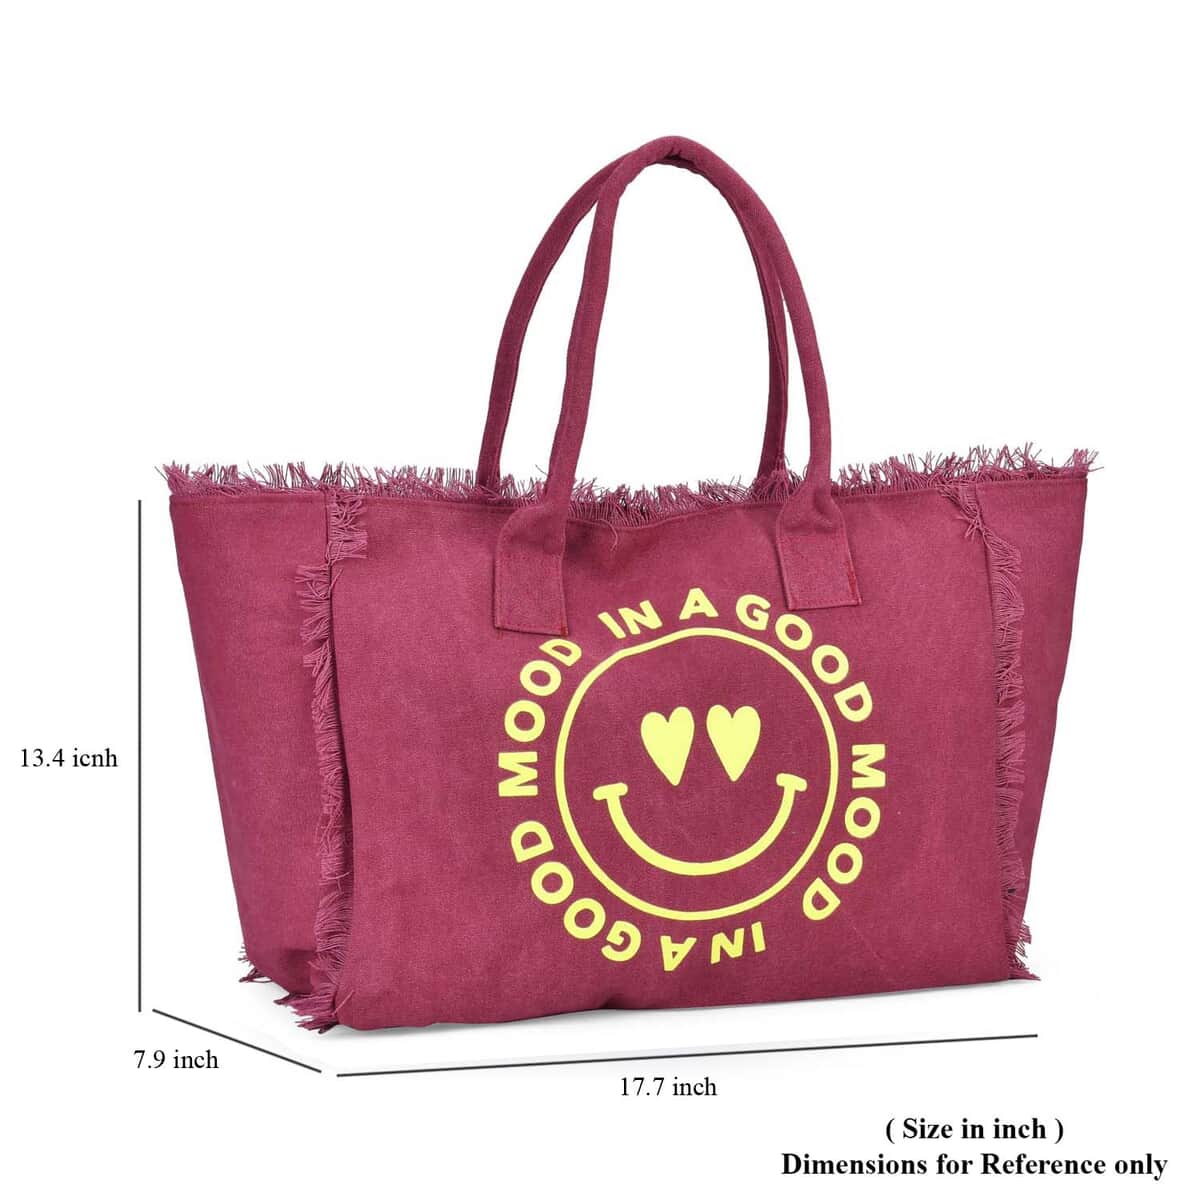 Navy Collection Wine Red Color Smiling Face with Heart-Eyes Printed Tote Bag (17.7"x7.9"x13.4") image number 6